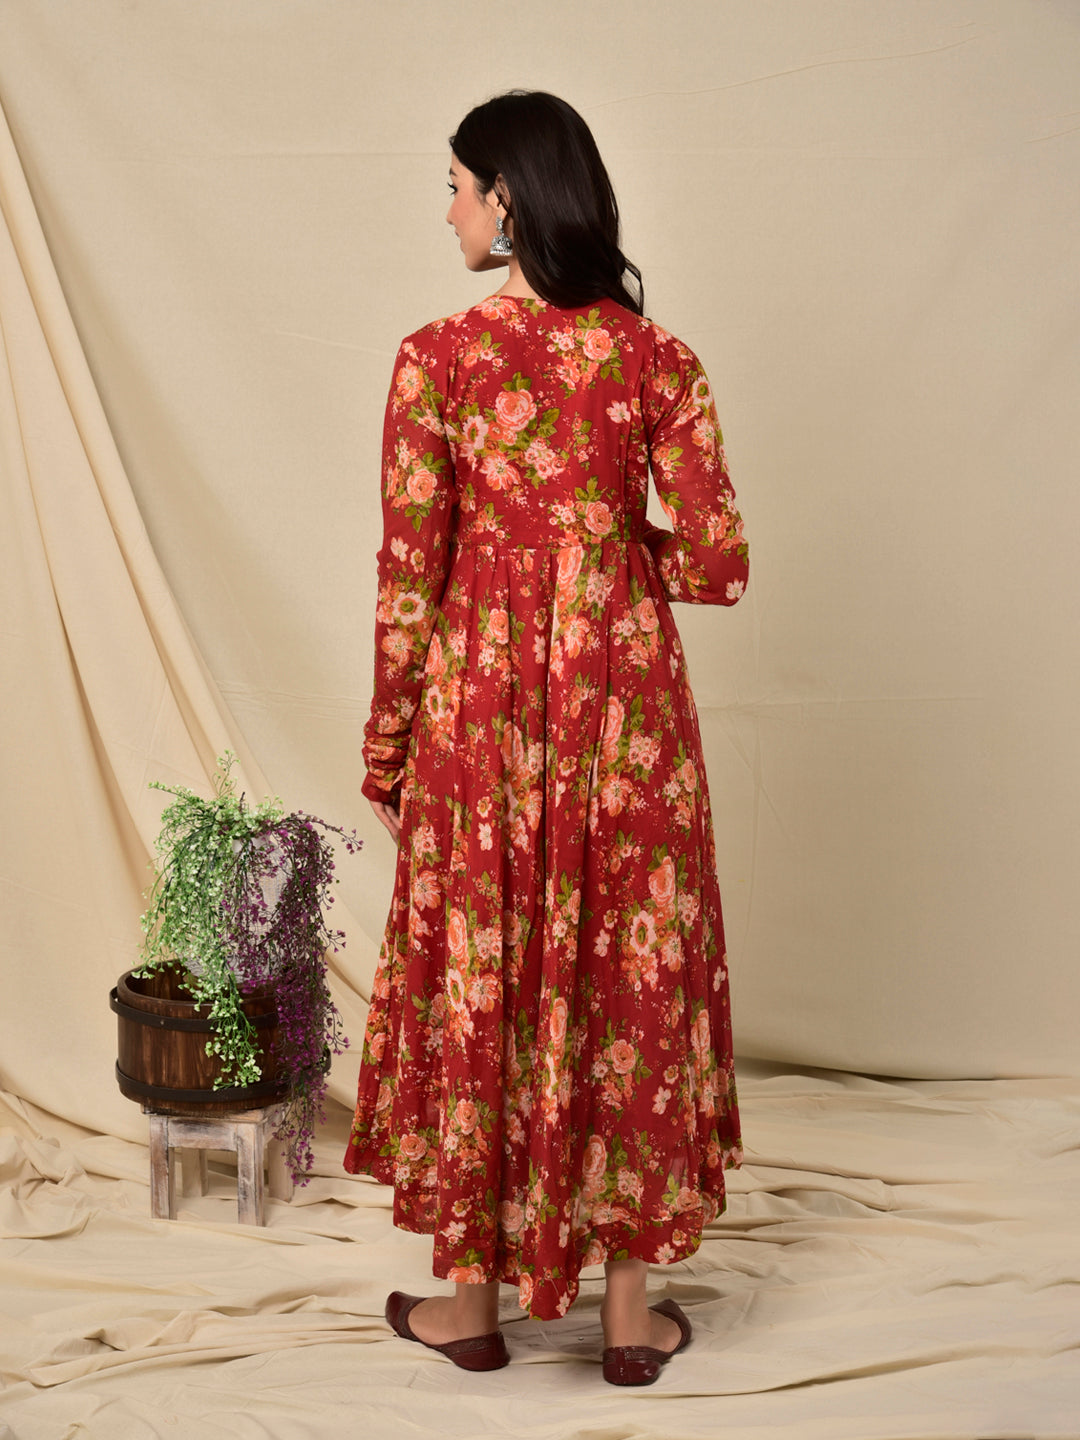 Cotton Umbrella Dress in Floral Jaal Red